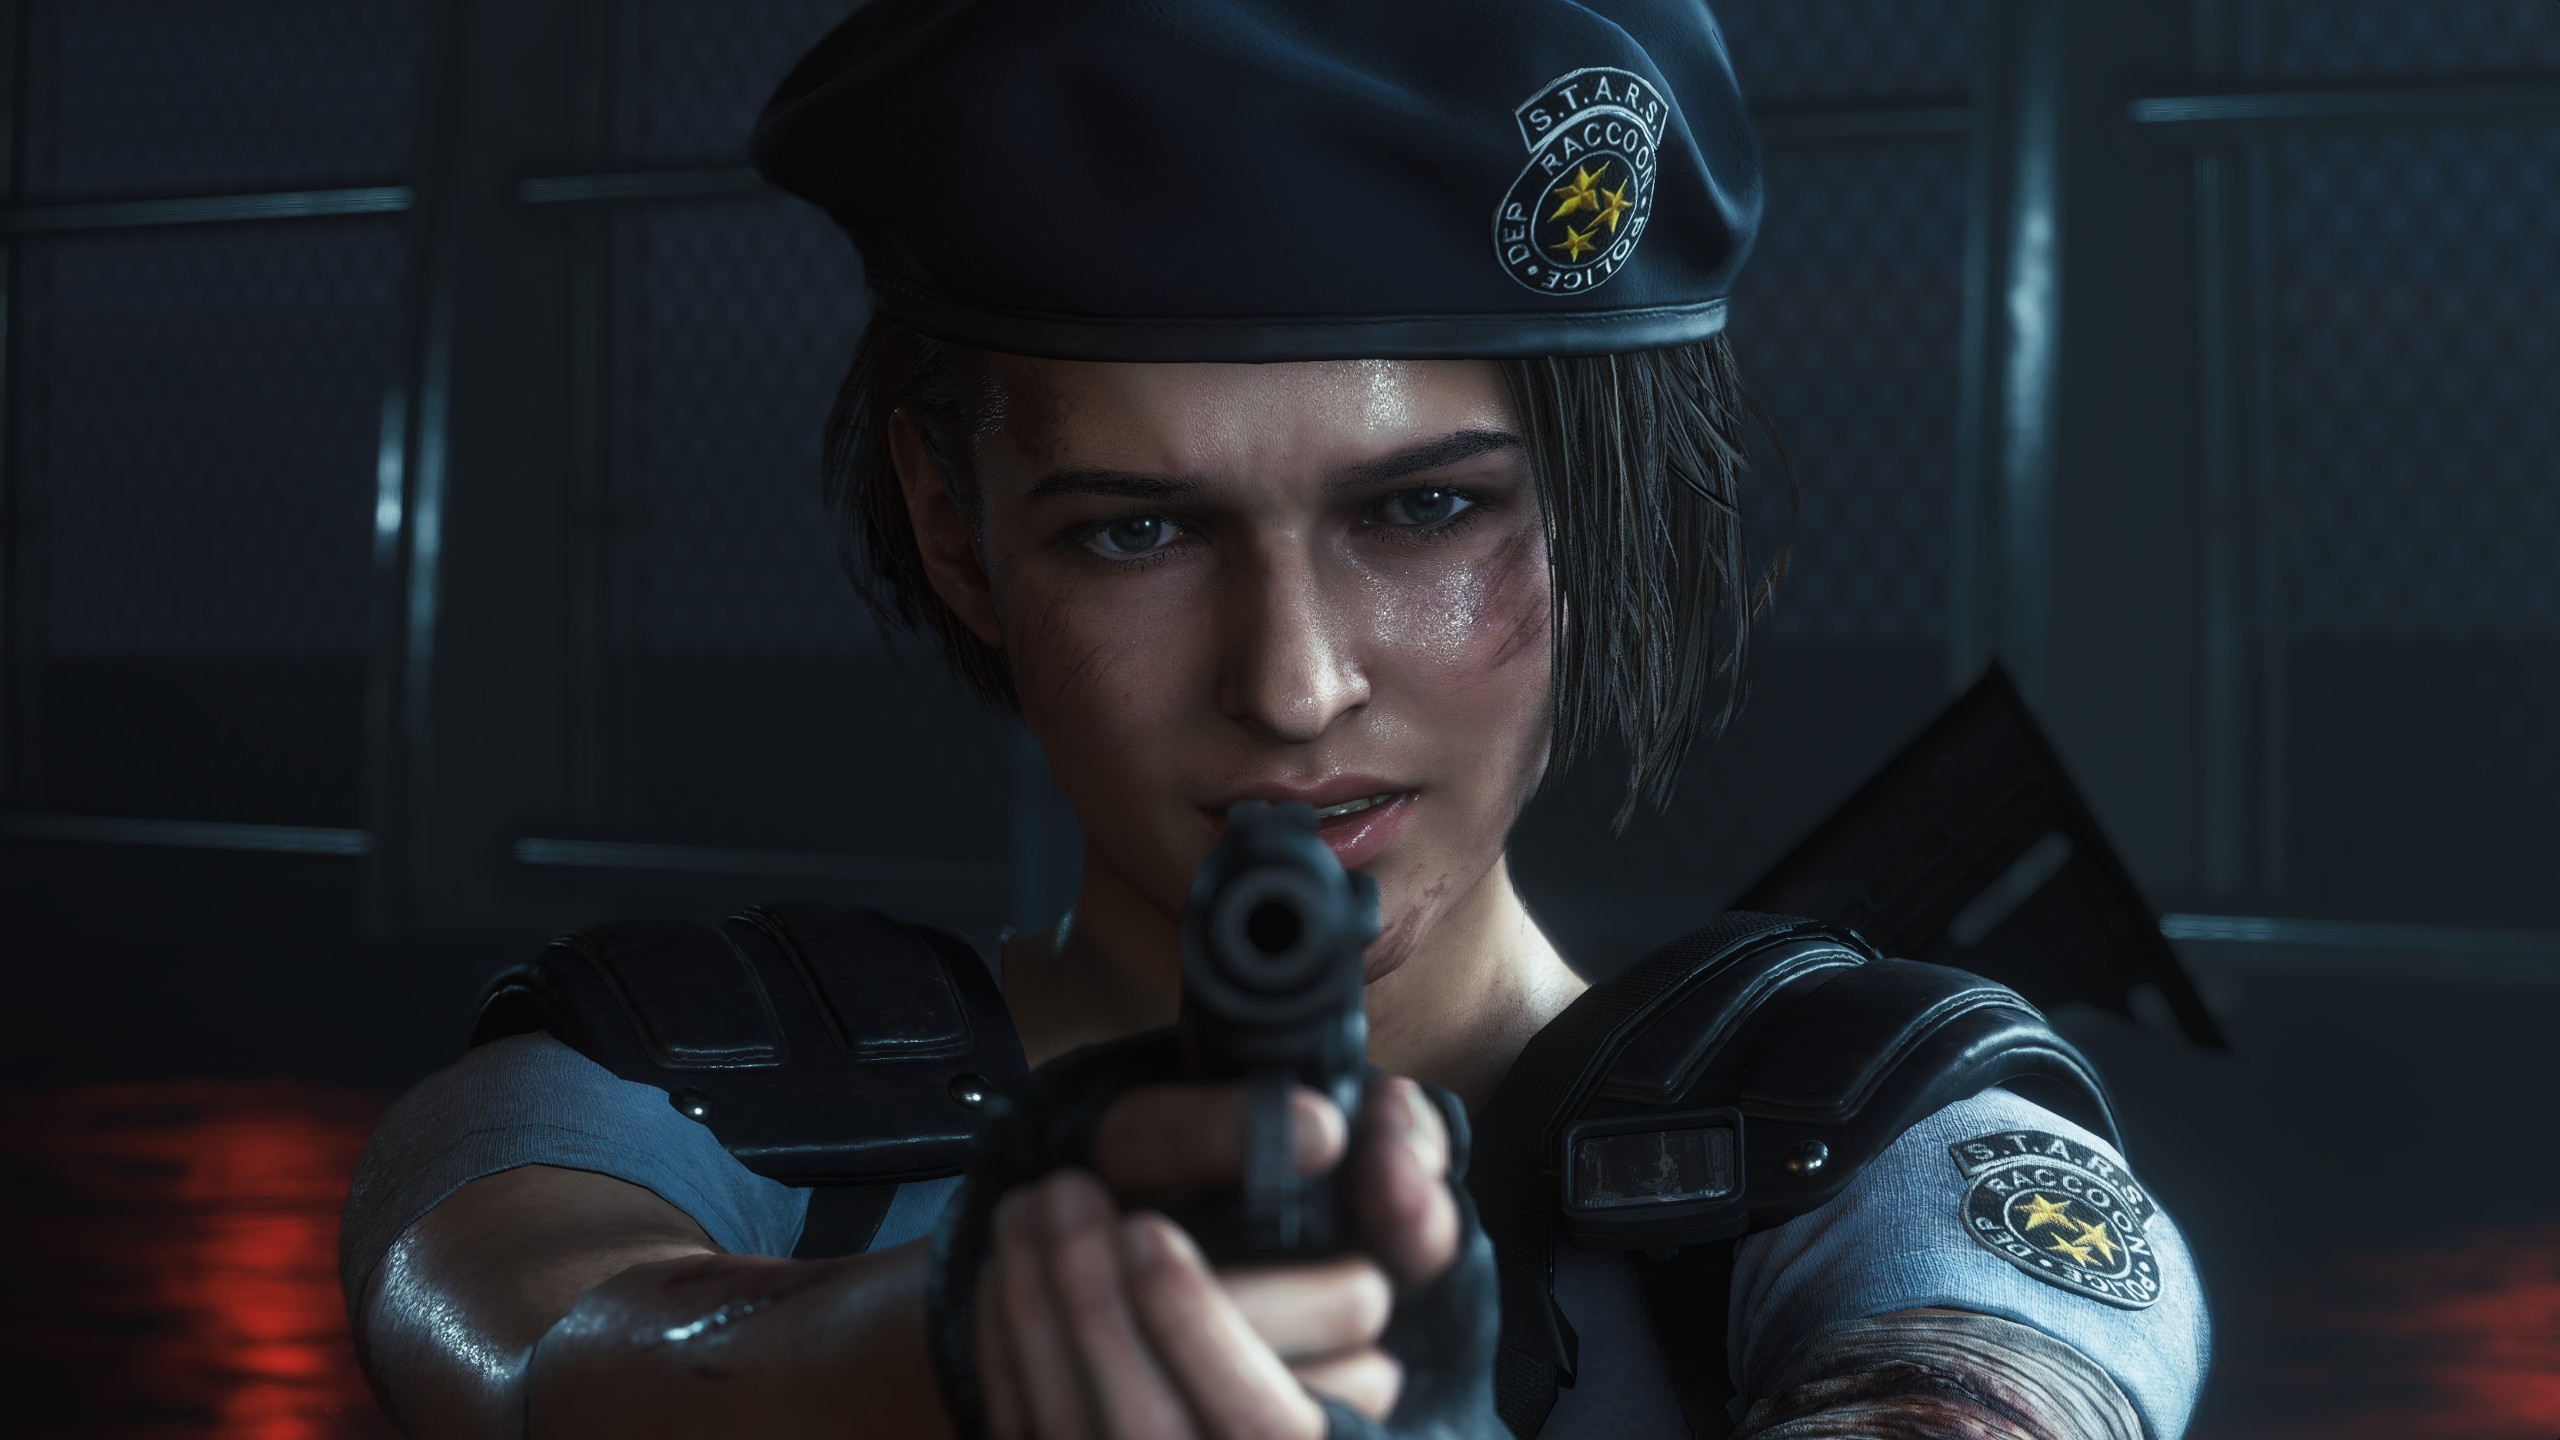 Wallpaper / Resident evil Resident Evil, Jill Valentine, video games, PC gaming, Capcom, S.T.A.R.S, frontal view, Resident Evil HD Remaster free download